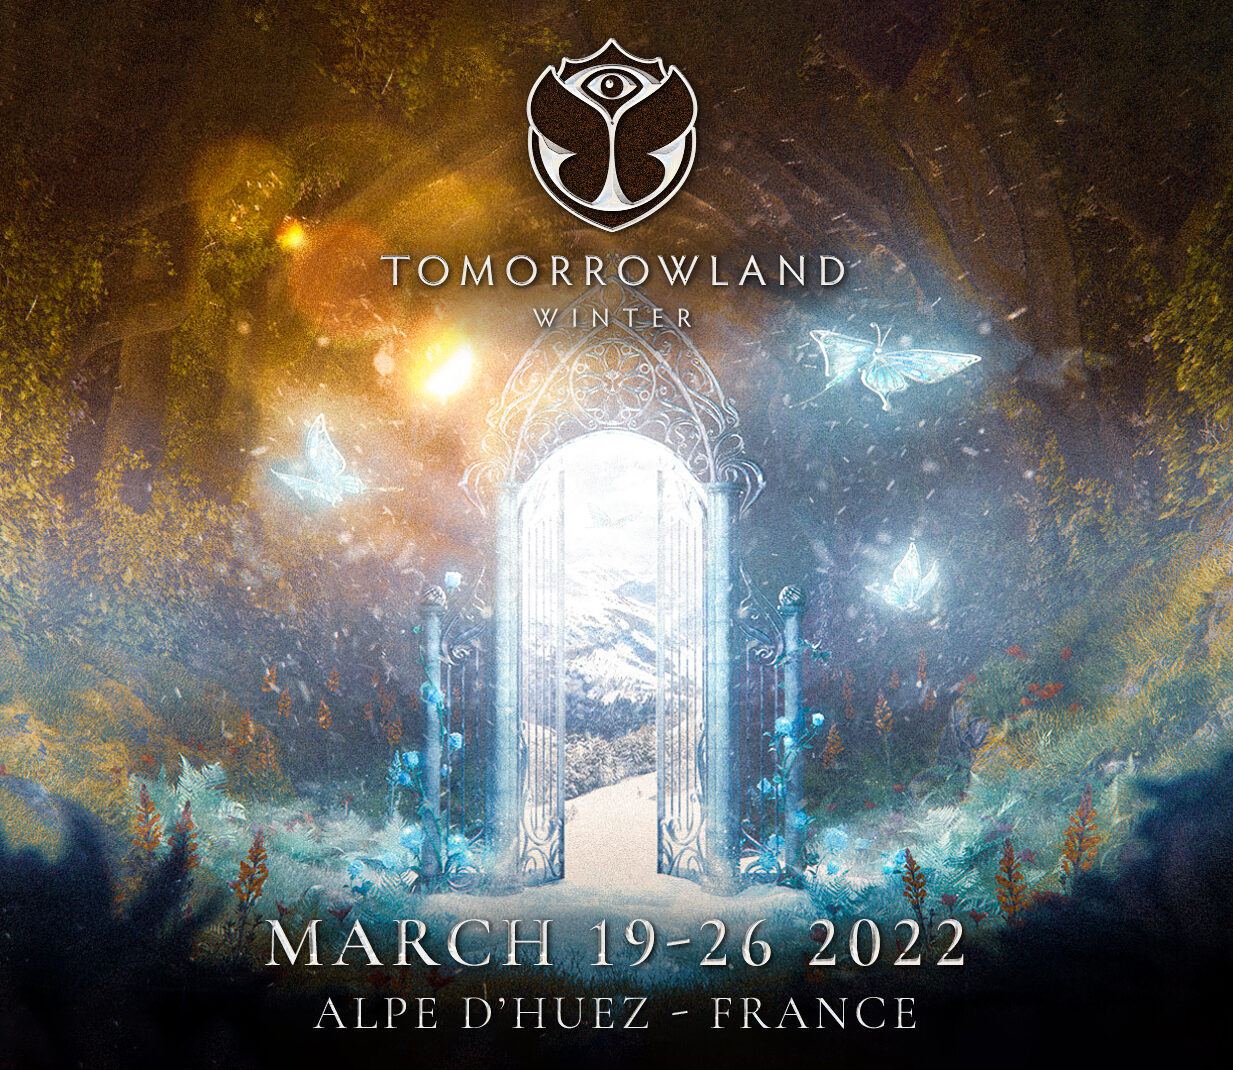 Tomorrowland Winter returns in 2022, to Alpe d’Huez, in France!